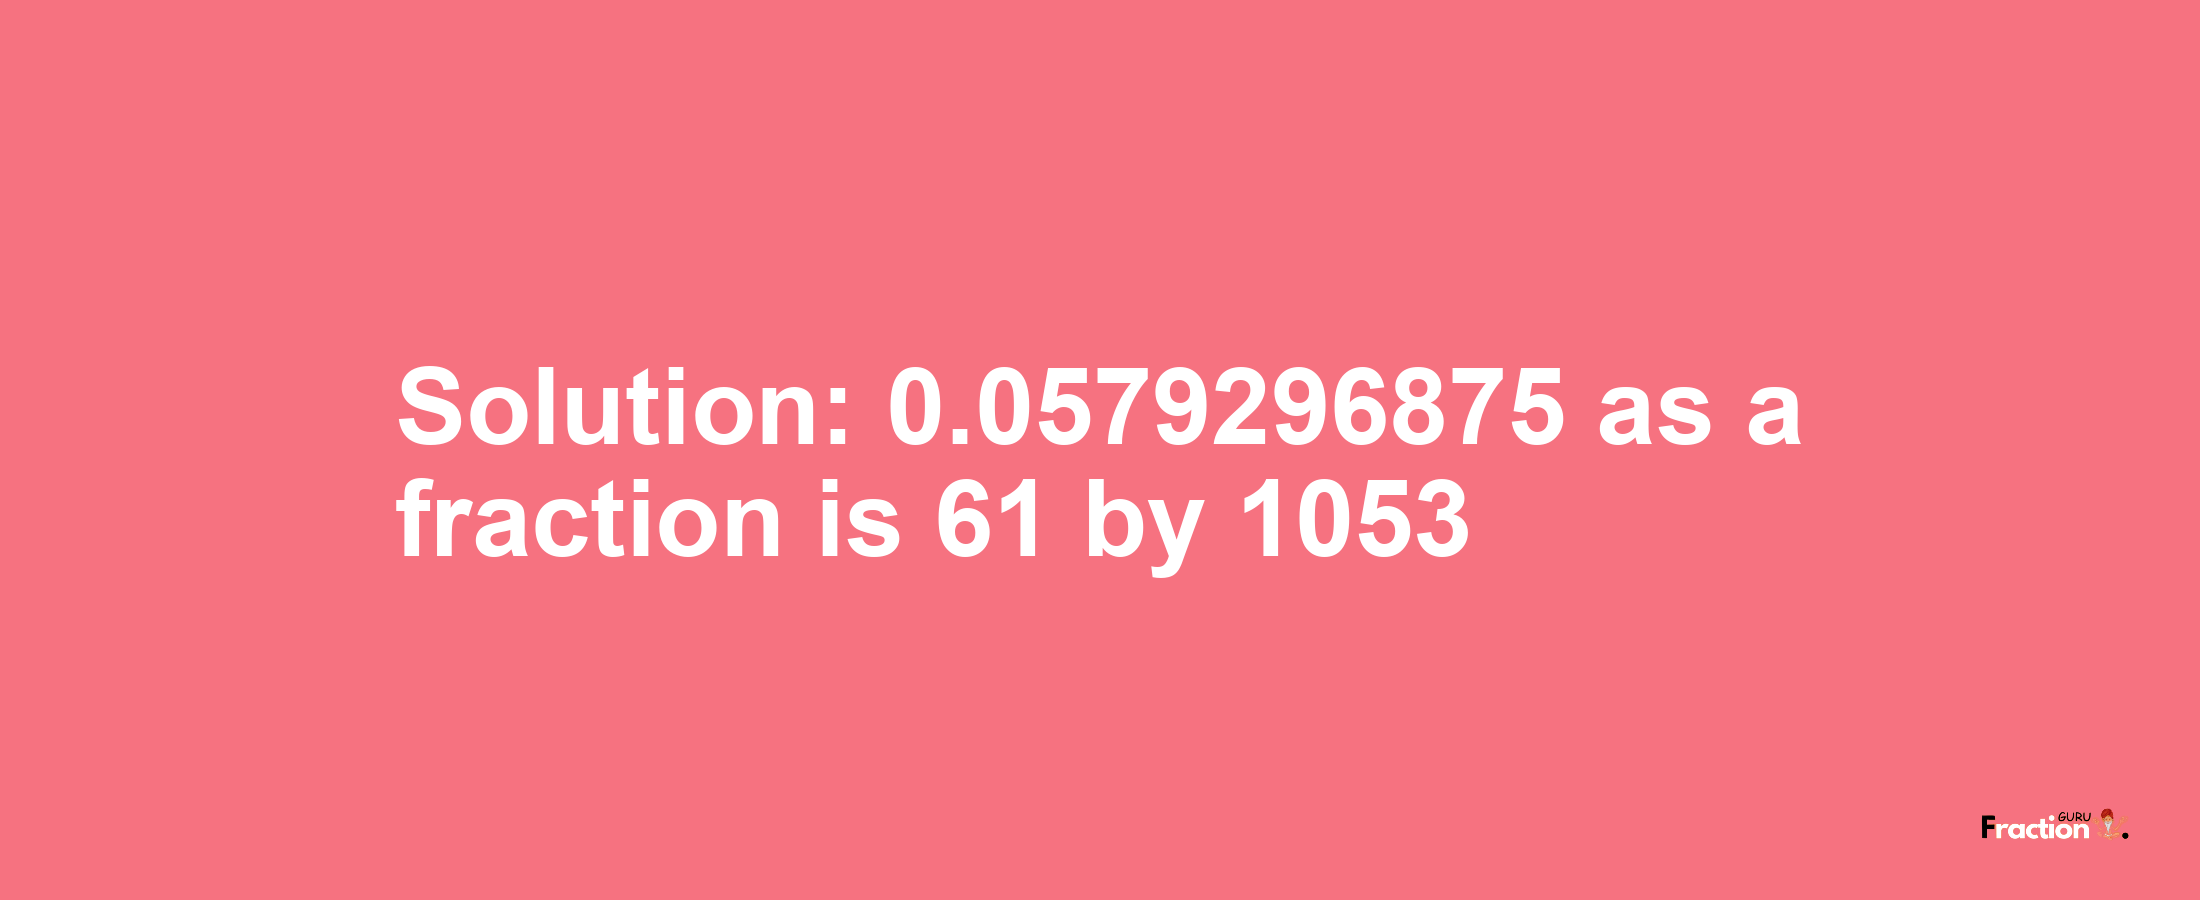 Solution:0.0579296875 as a fraction is 61/1053